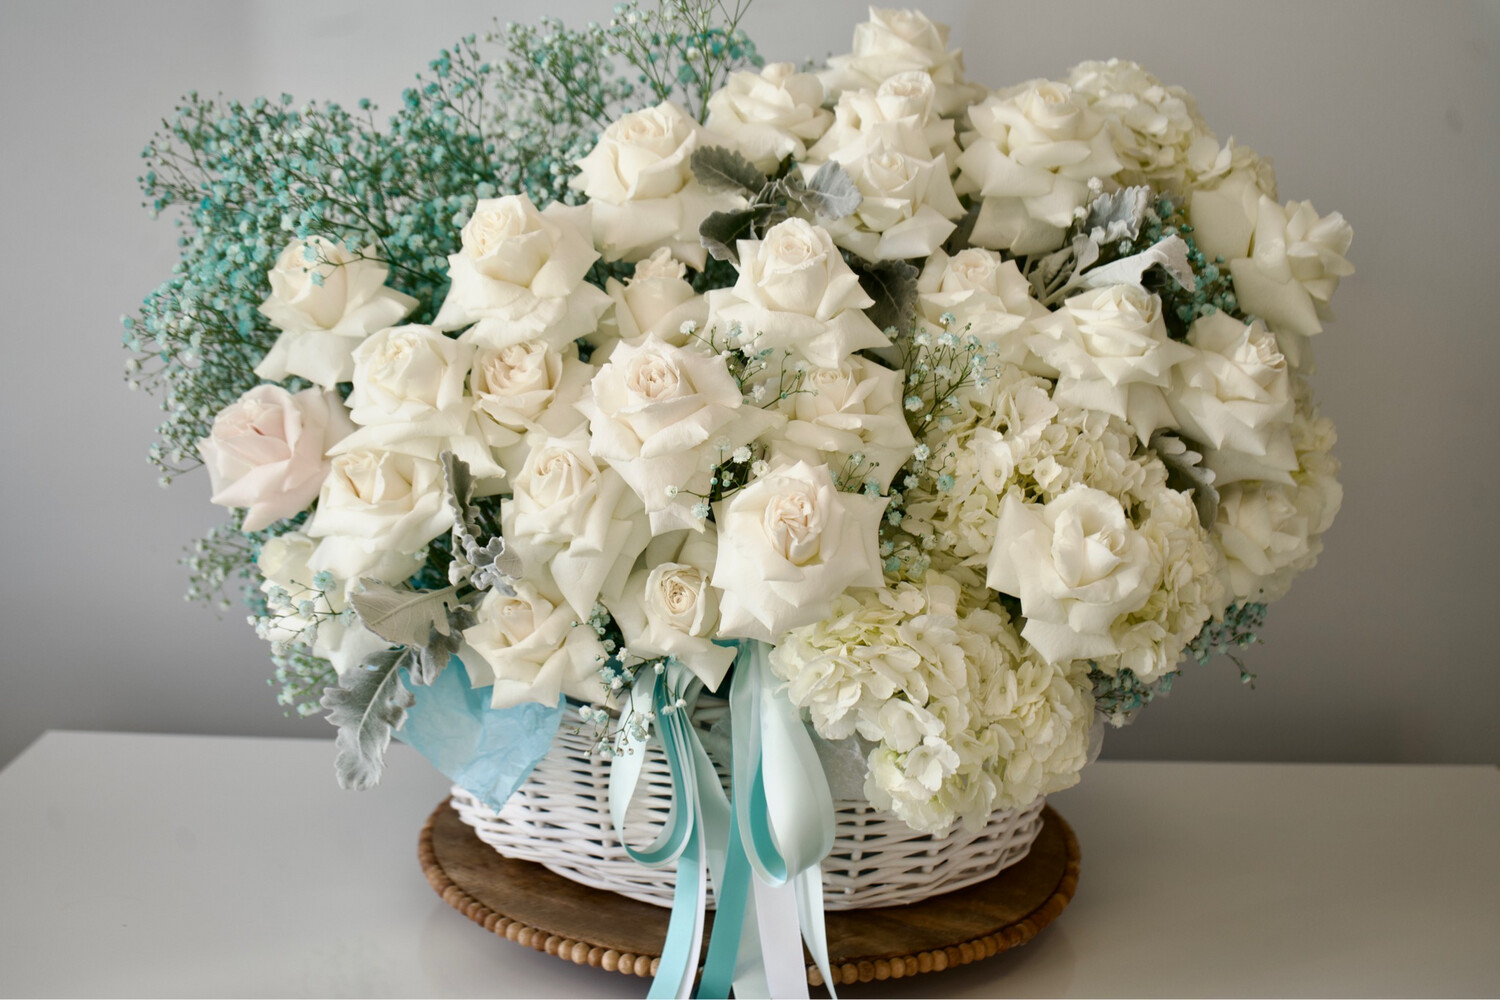 Big Basket Of Roses And Baby Breath